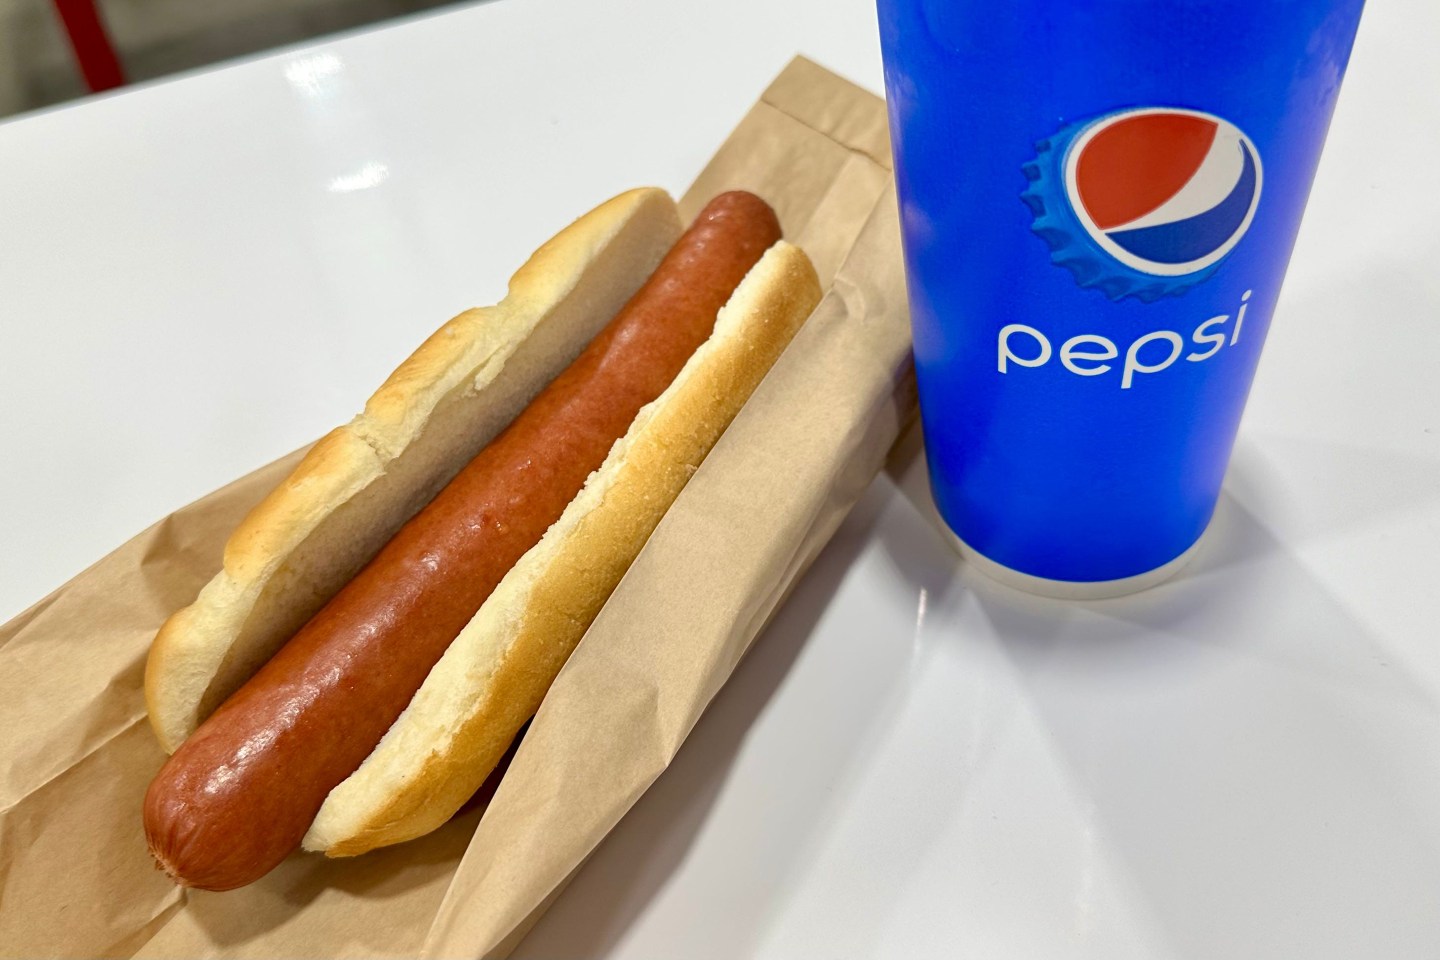 This hot dog and drink combo is single handedly the most popular food court option at Costco.
Bev Shaffer / USA TODAY NETWORK/Reuters